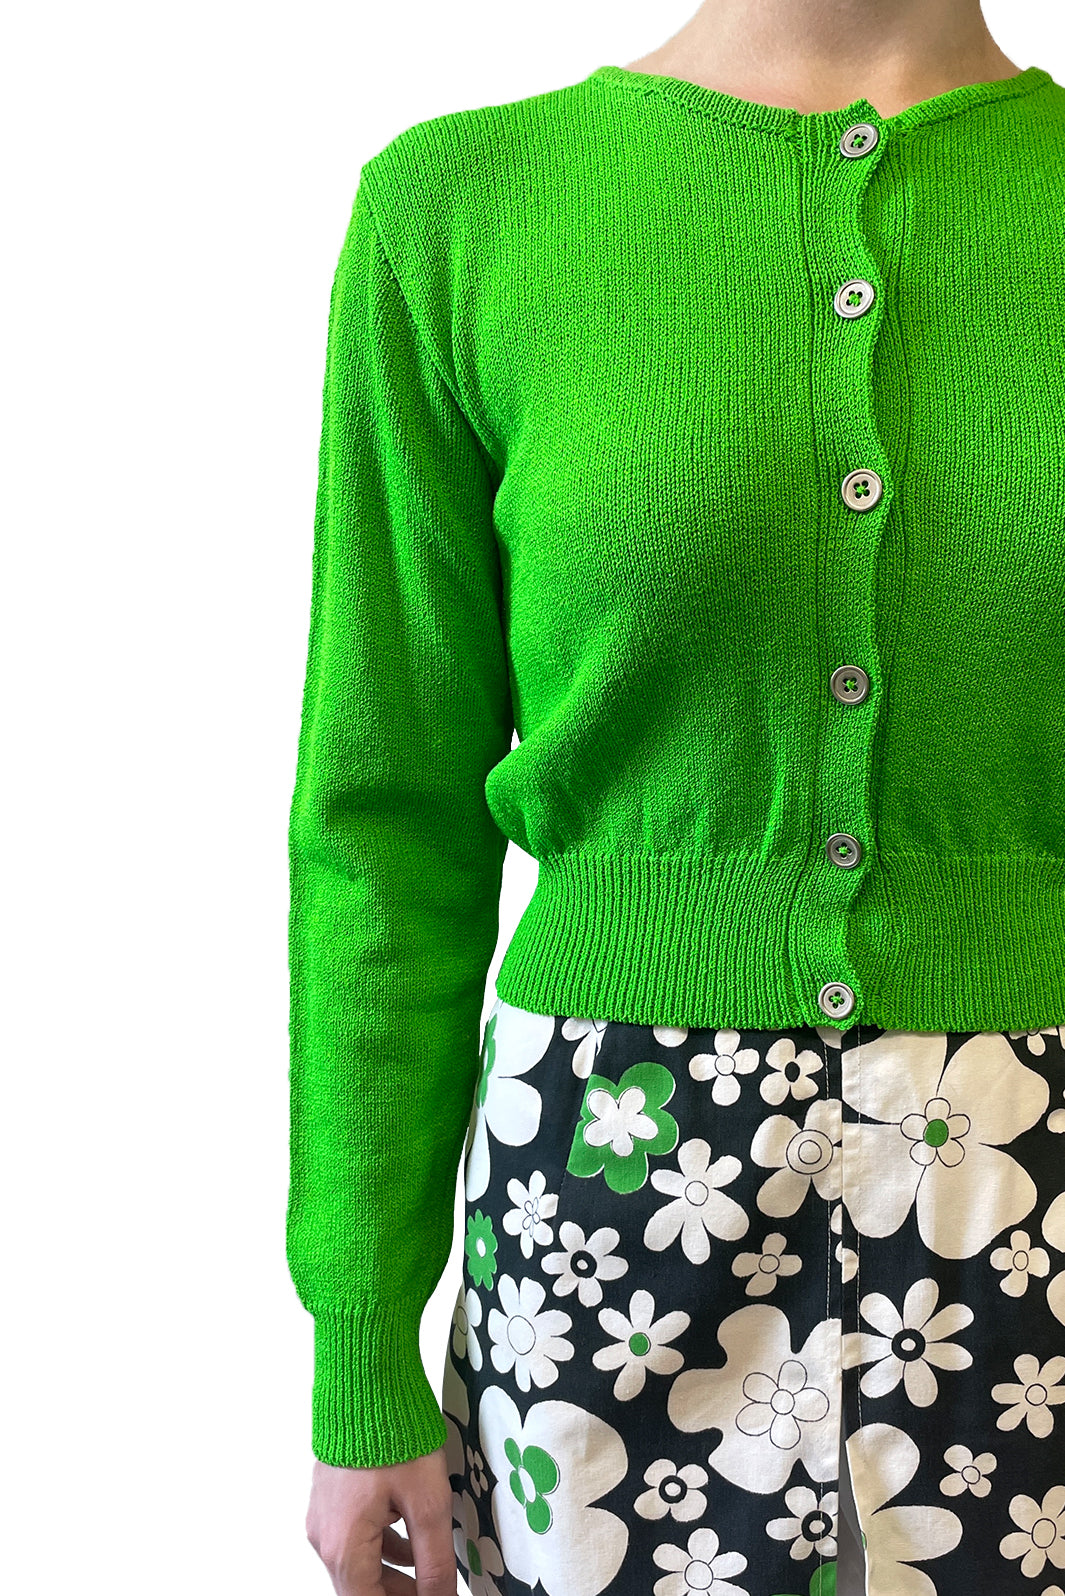 James Coviello for Anna Sui Cropped Green Cardigan